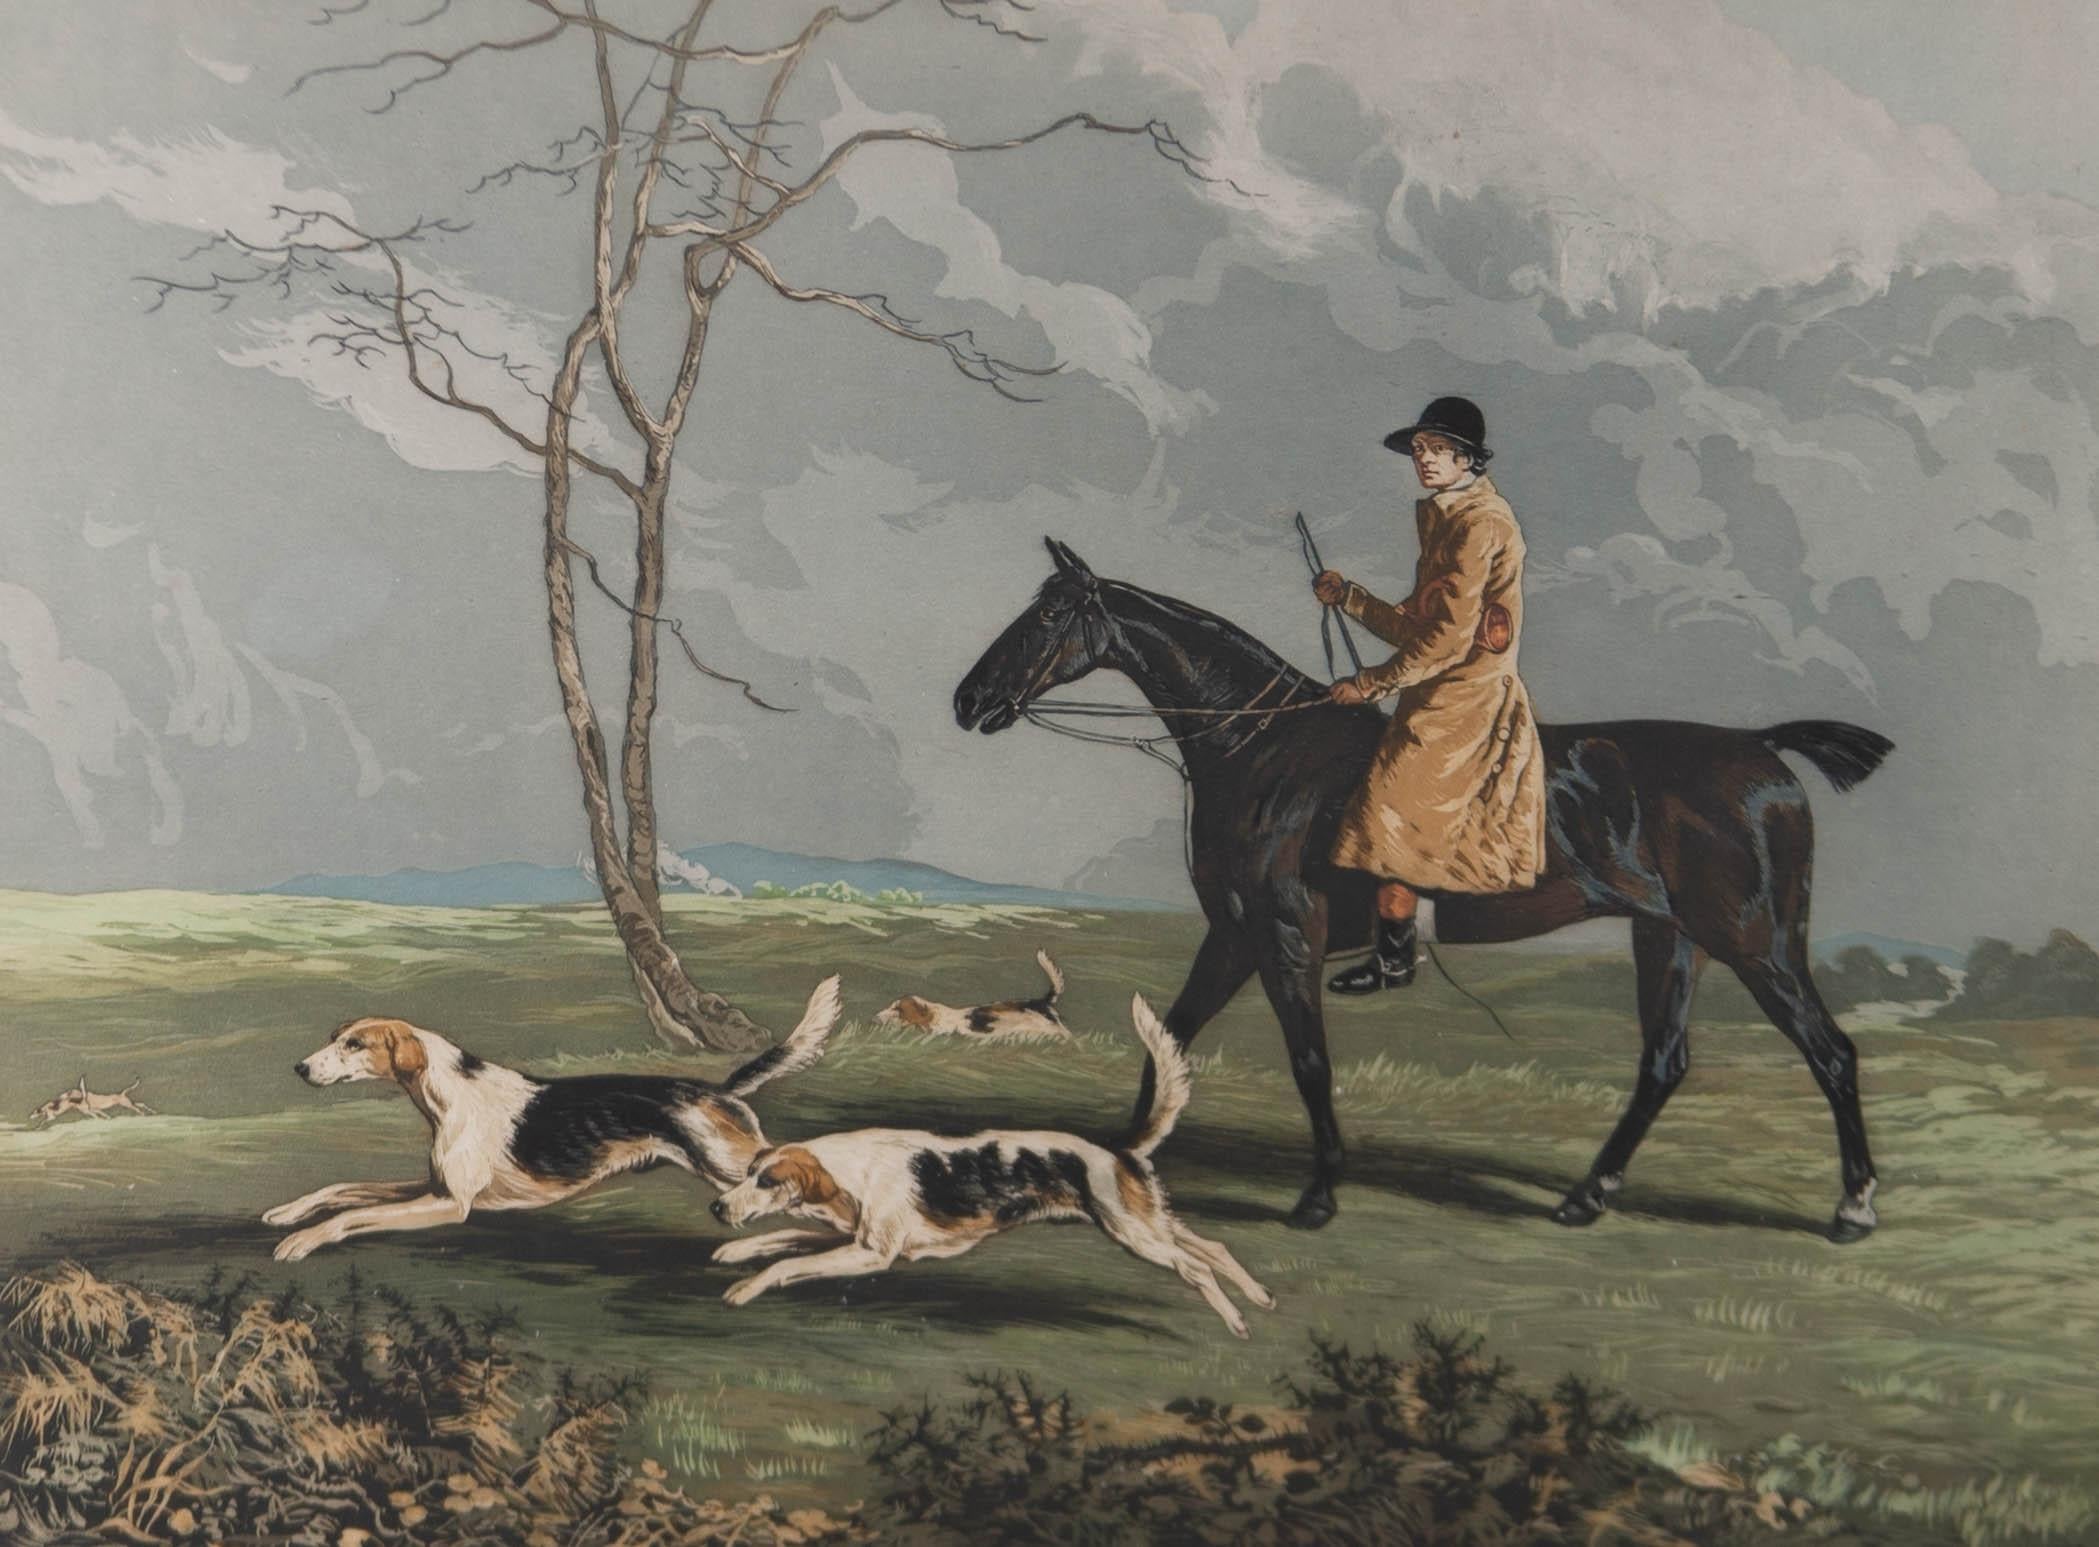 A fine print with an unusual mix of aquatint, etching and hand colouring. The aquatint background has a softer feel than the hard edged images of the hounds, horse and rider. There is an inscription at the bottom with the title, including the name